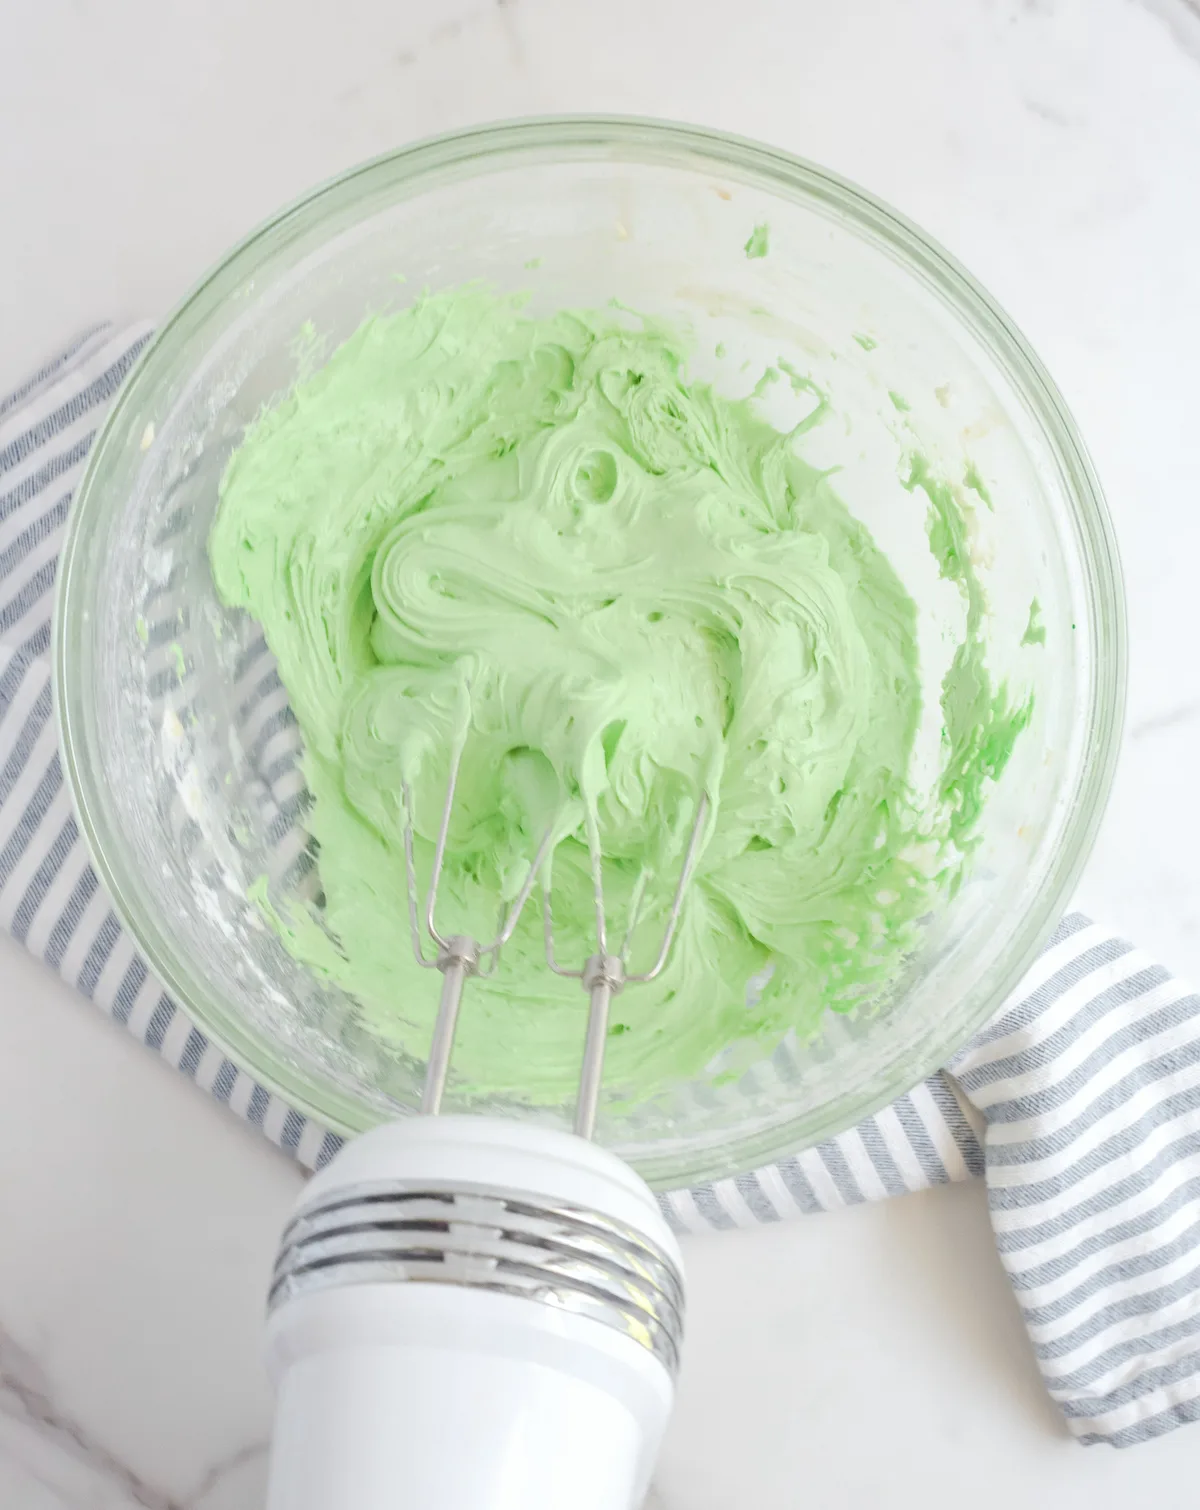 Batter dyed green and mixed with a mixer